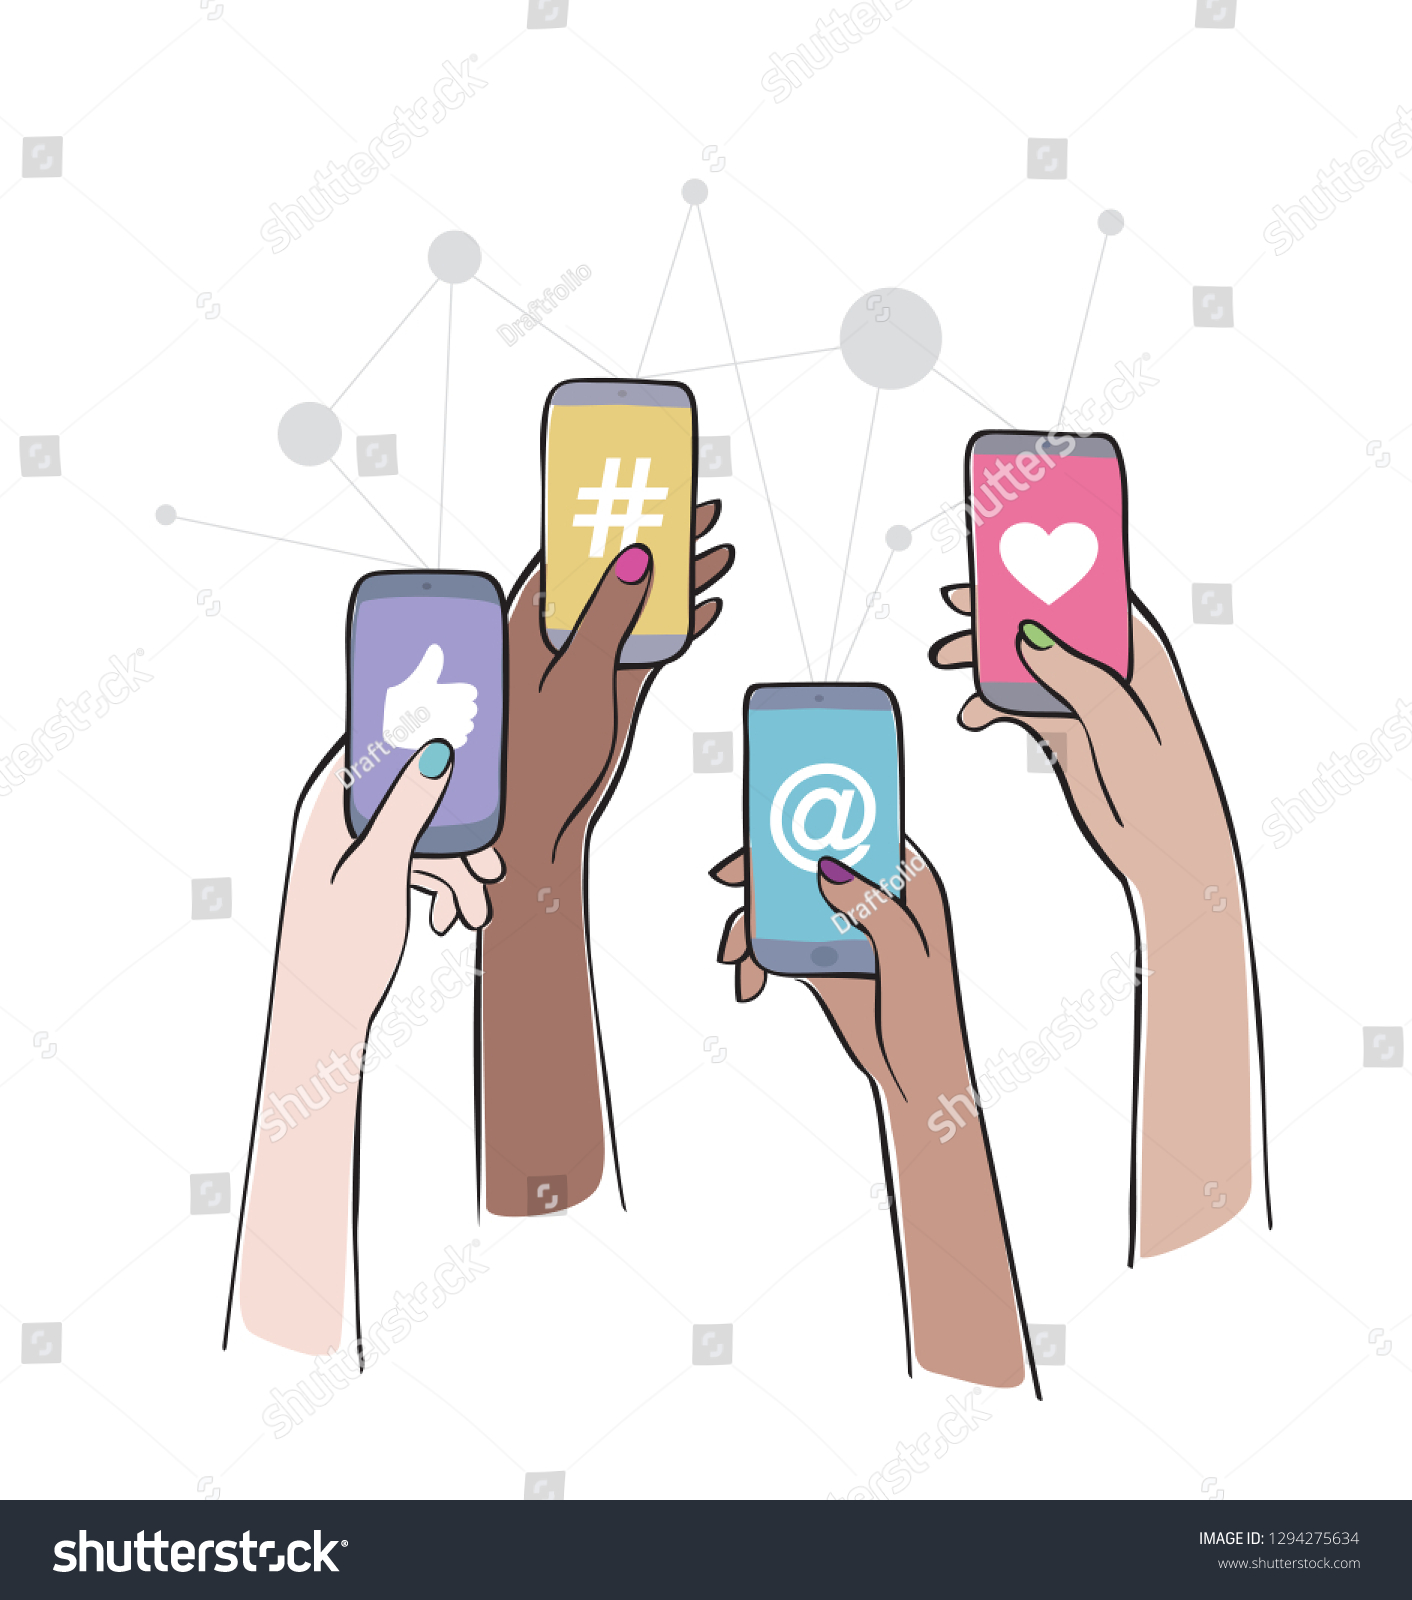 Social Media Interaction. Female hands holding smartphones with social network apps icons. Online communication and connection. Isolated vector illustration. #1294275634